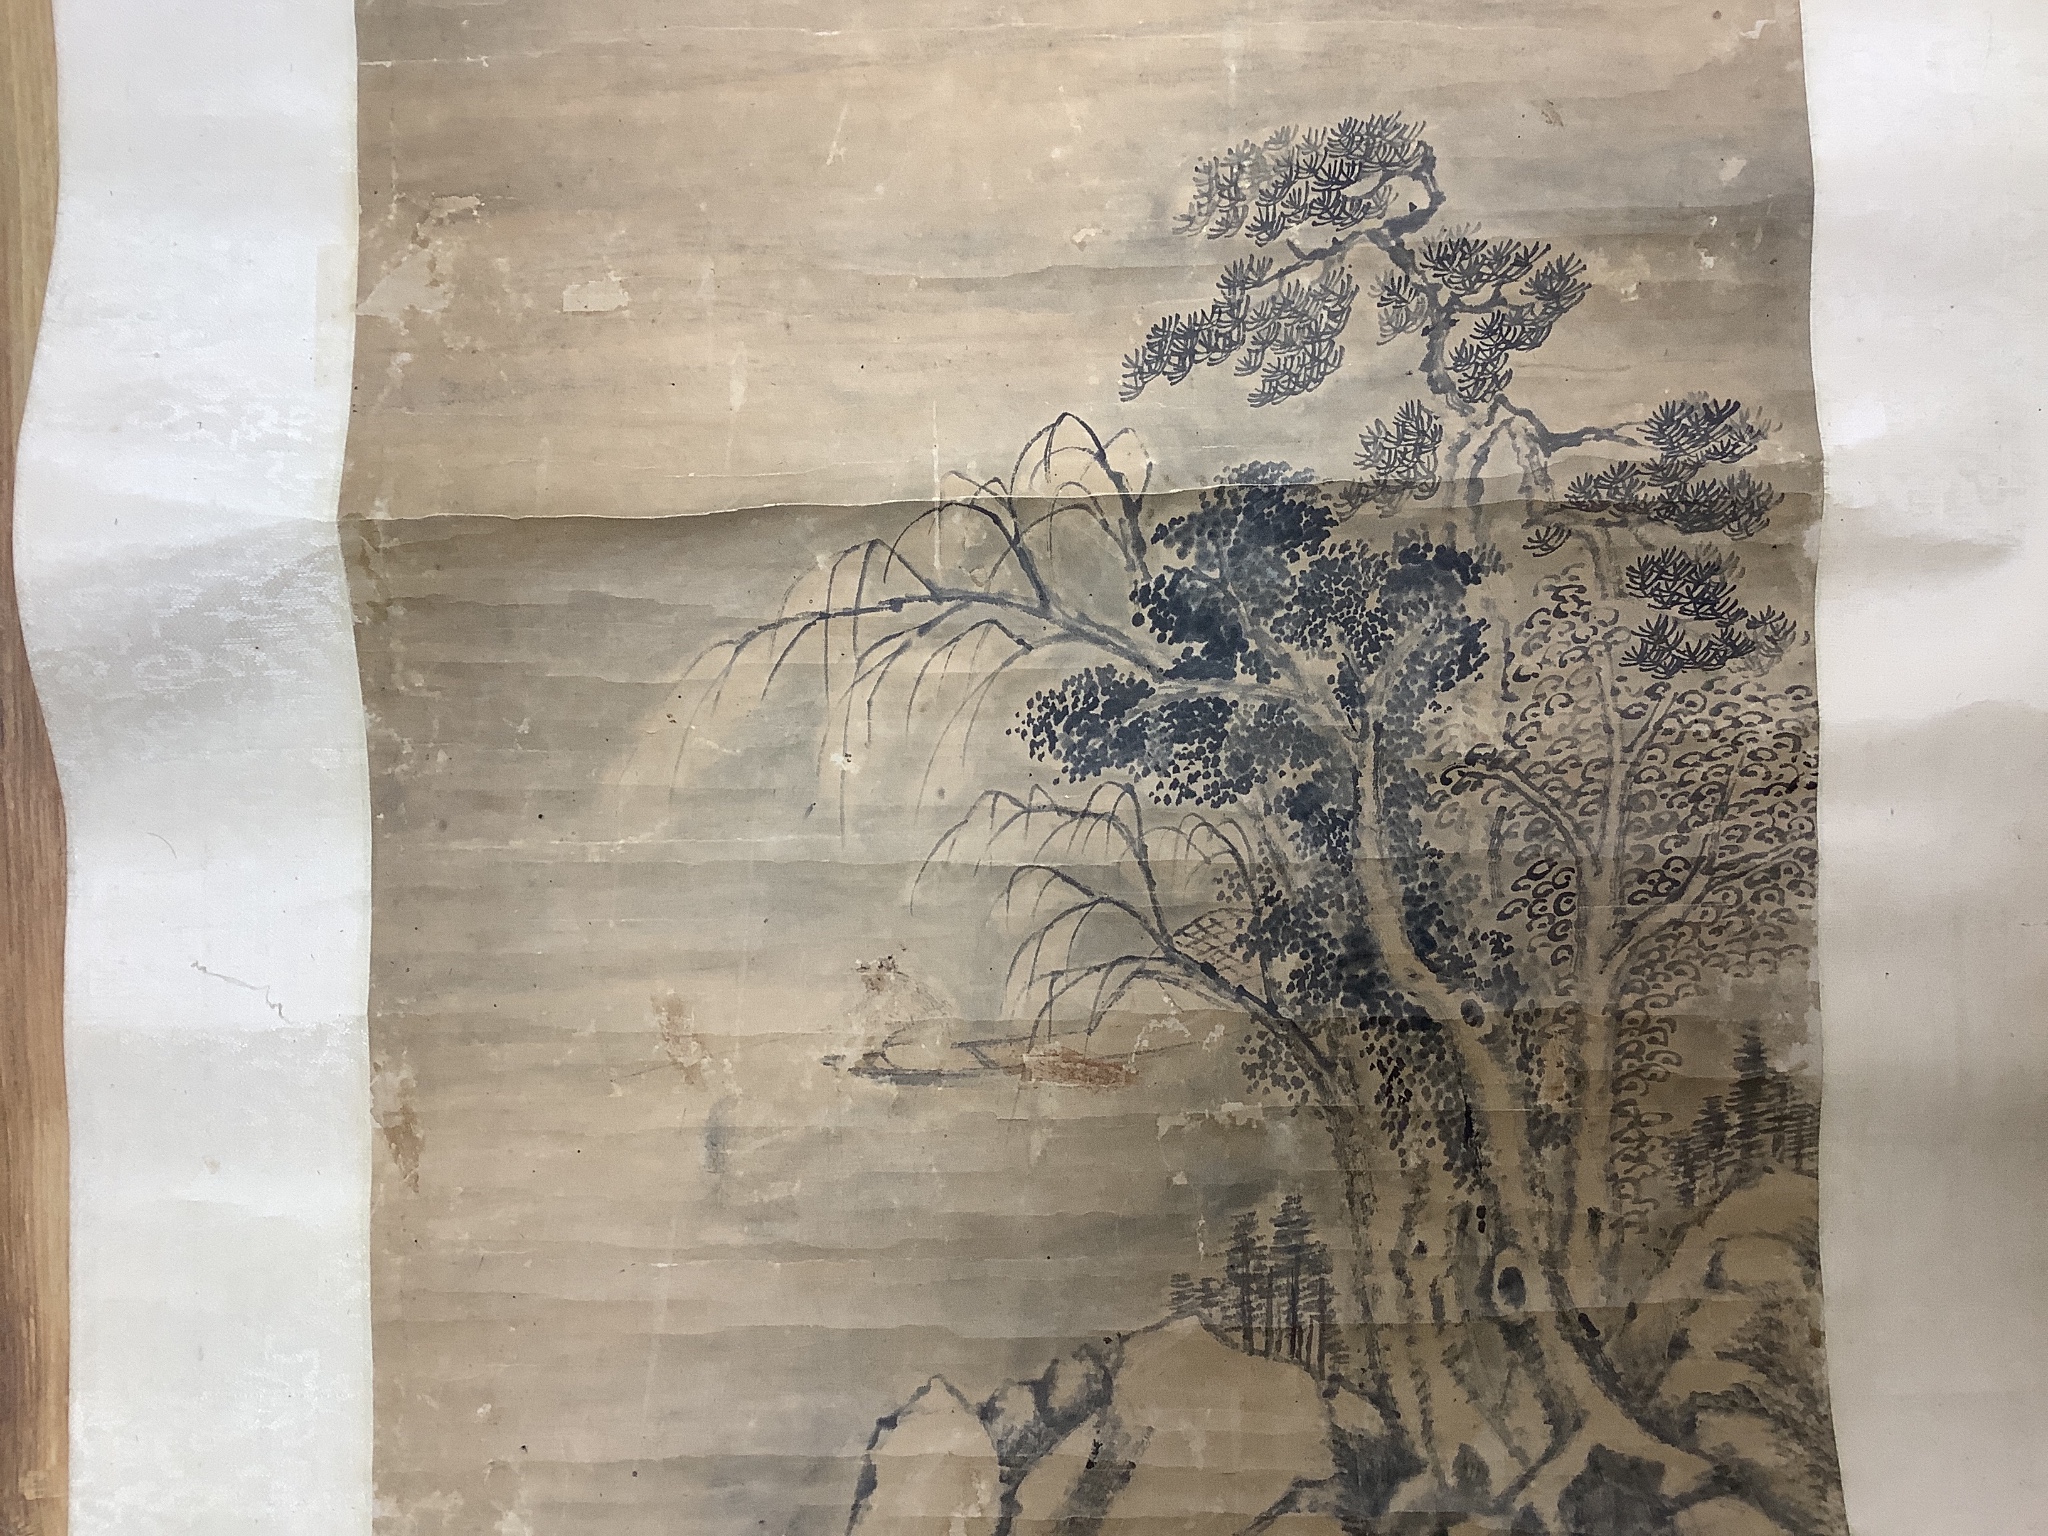 A Chinese scroll painting on paper of a river landscape scene, Qing dynasty Image 100 cm X 36 cm